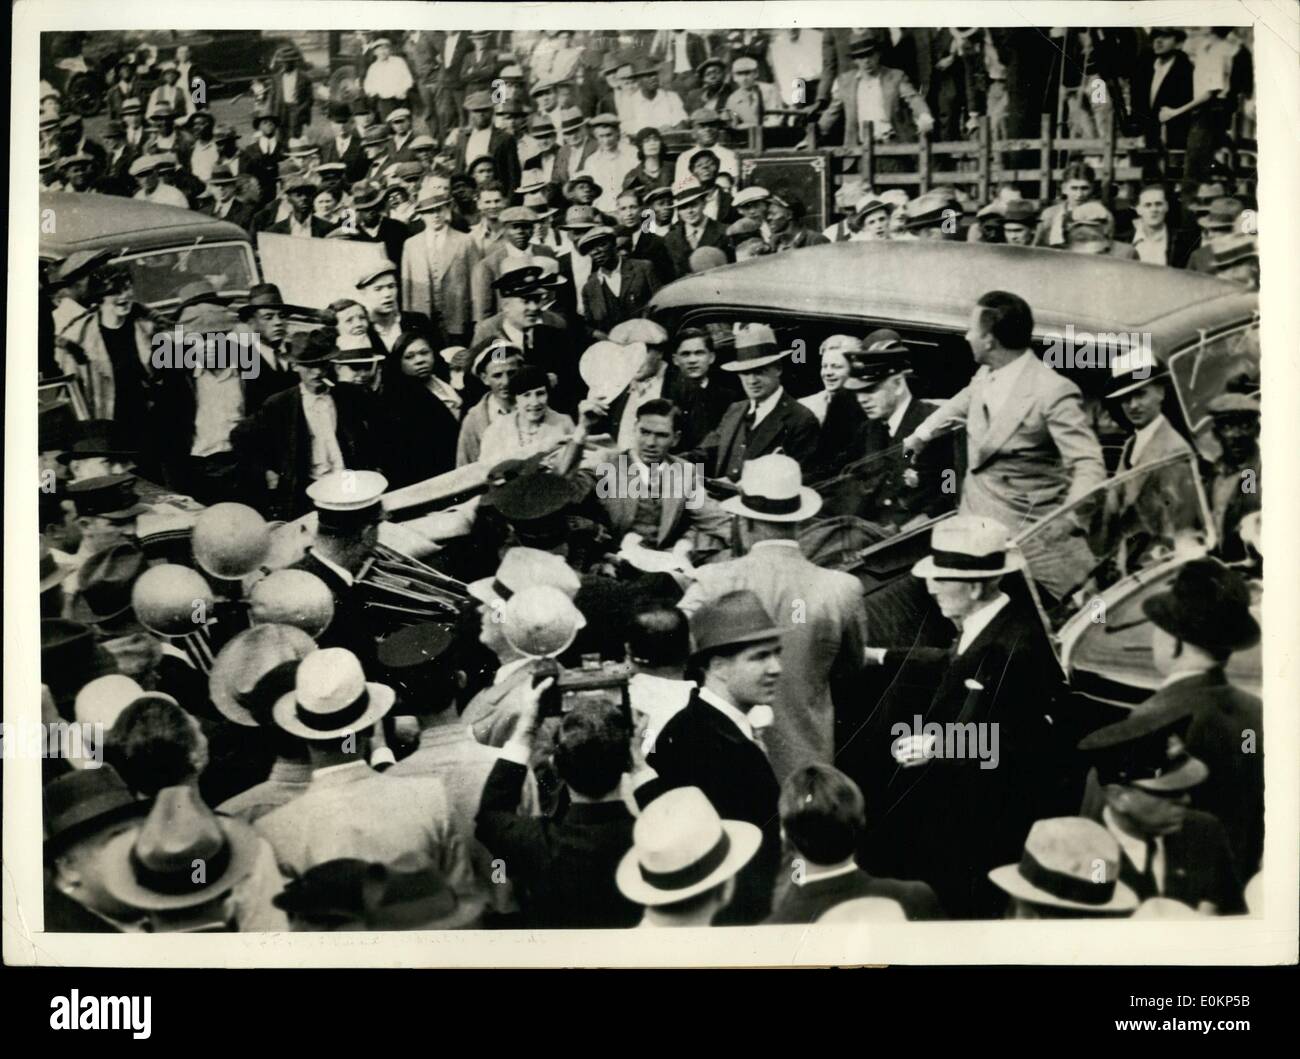 Oct. 10, 1934 - DIZZY DEAN WELCOMED HOME Jerome Herman (Dizzy) Dean, elder of the brother who pitched the St. Louis Cardinals into a world championship, salutes the huge crowd of St. Louis MO. admirers as he arrives back in the city from Detroit. Dizzy, seated in the car Stock Photo